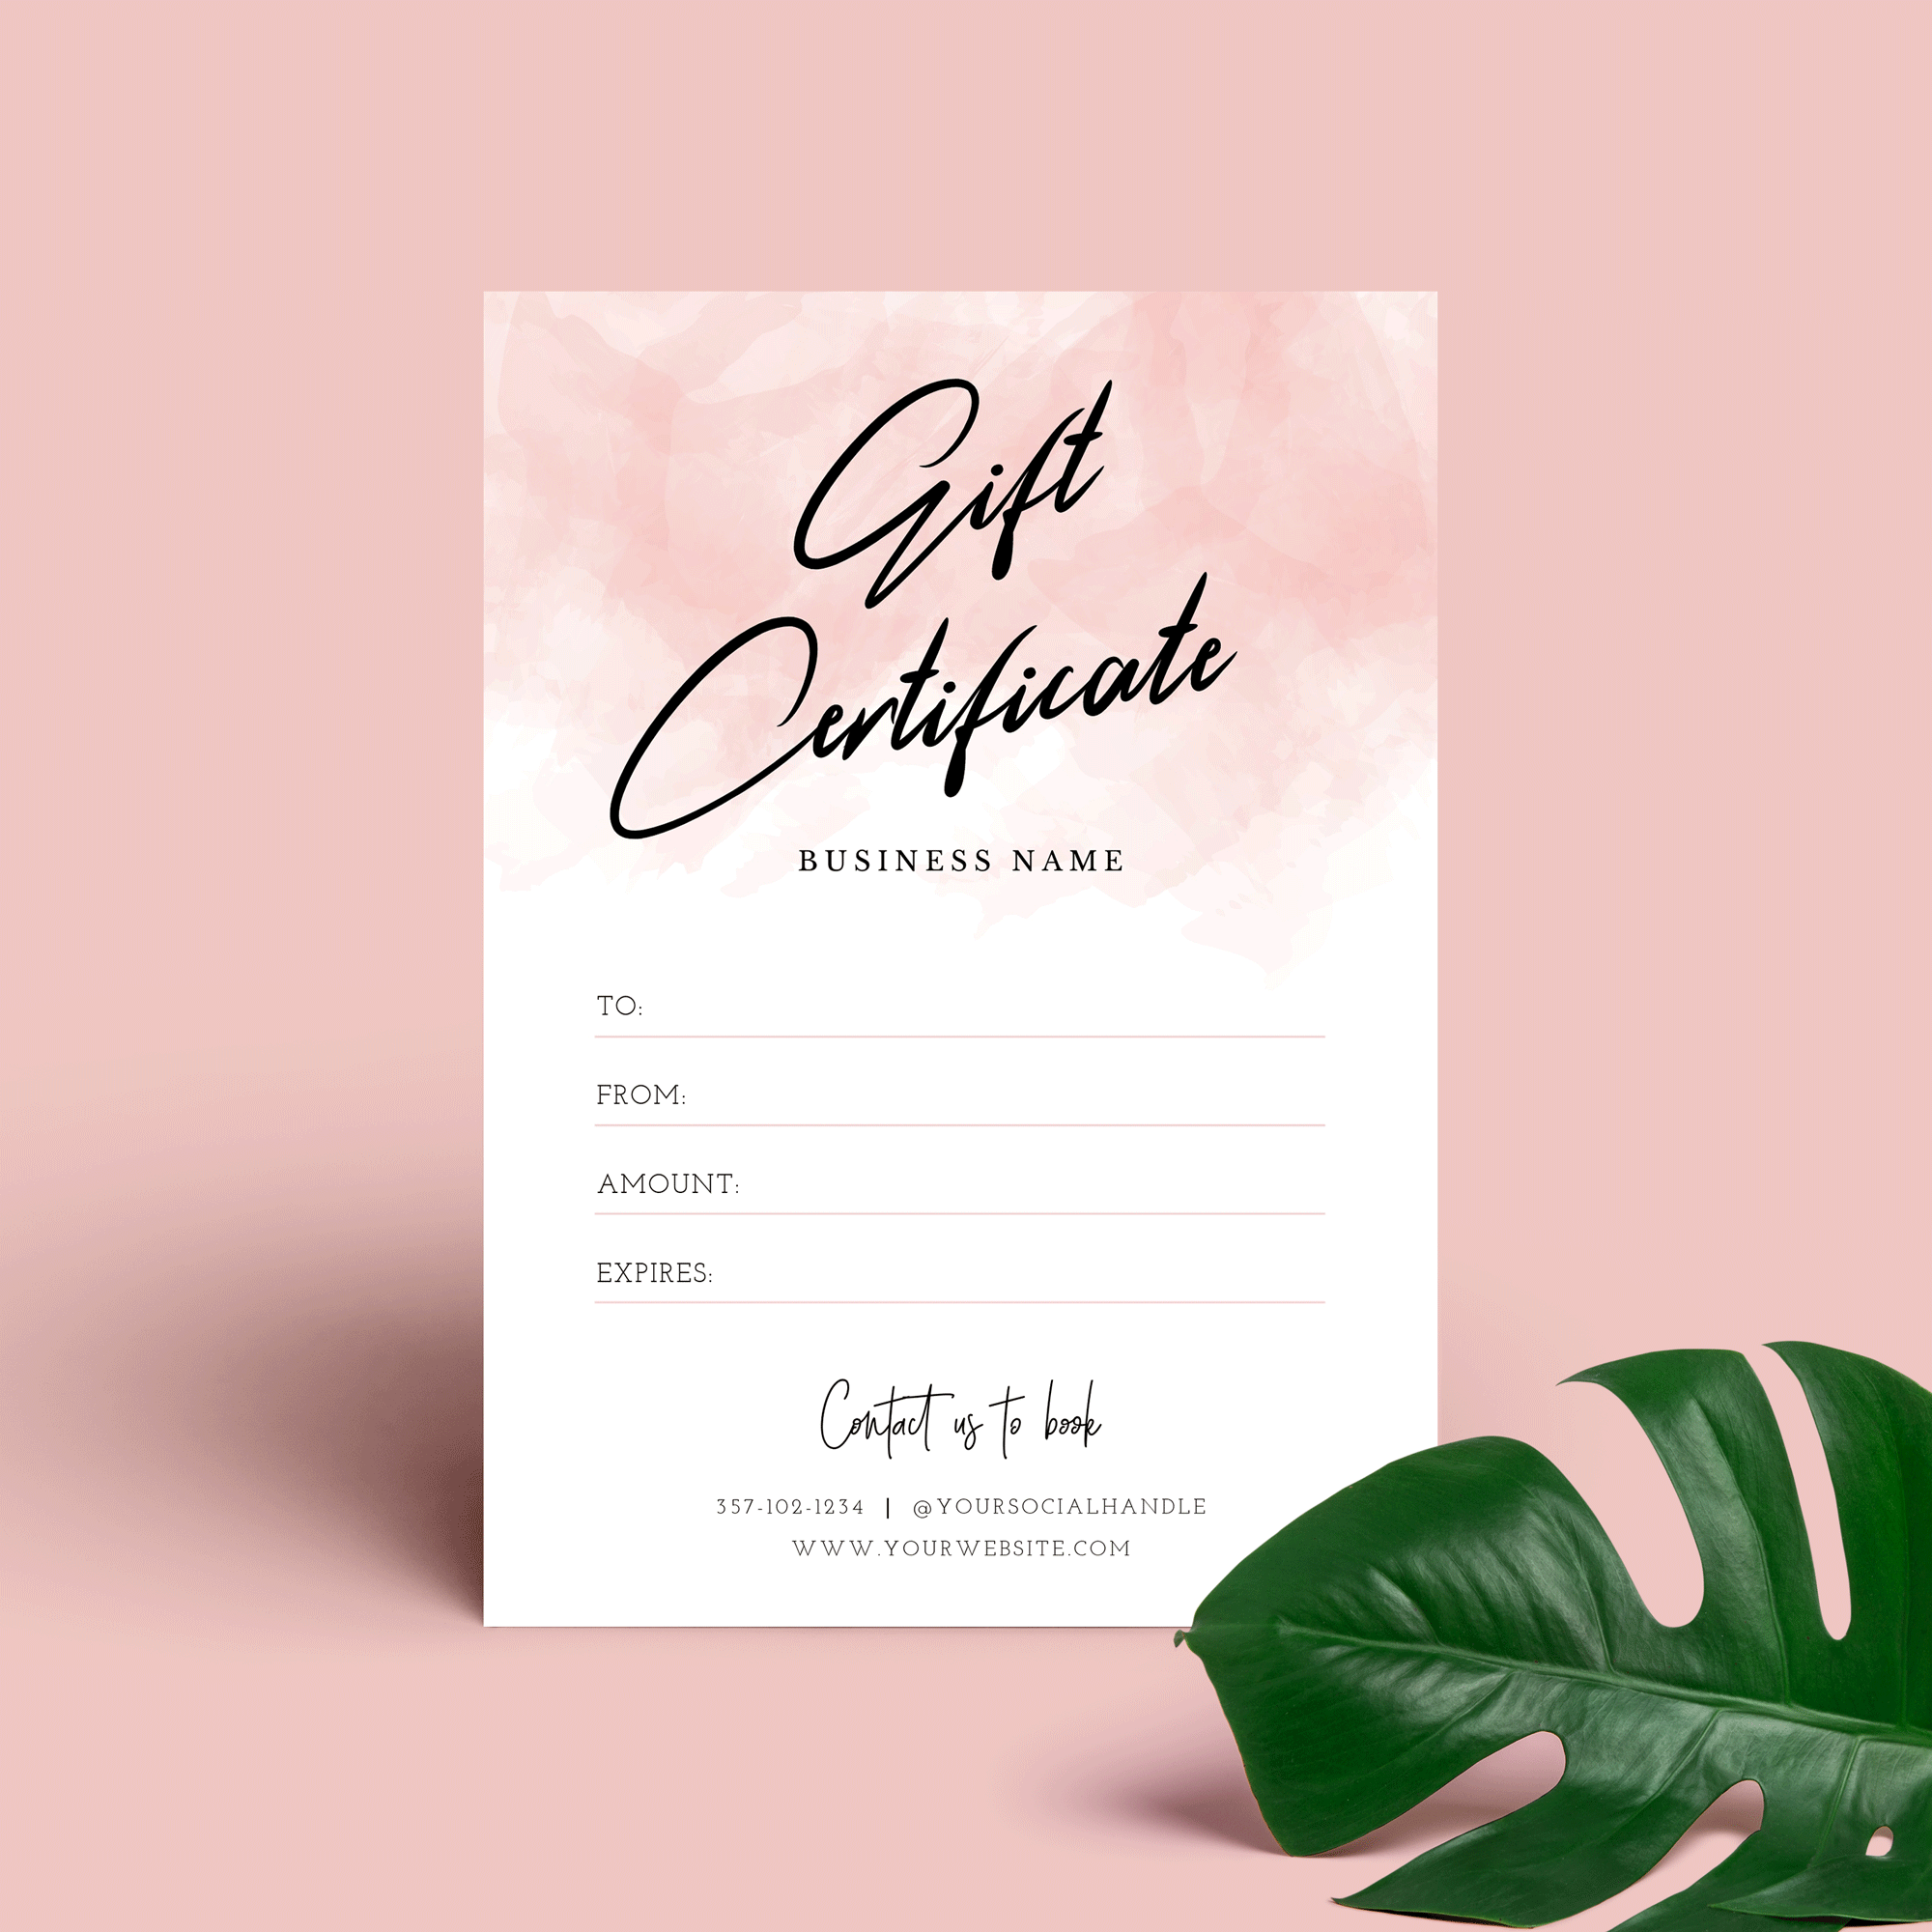 Elegant Gift Voucher Template – Printable Pink Watercolor Gift Card With Elegant Gift Certificate Template